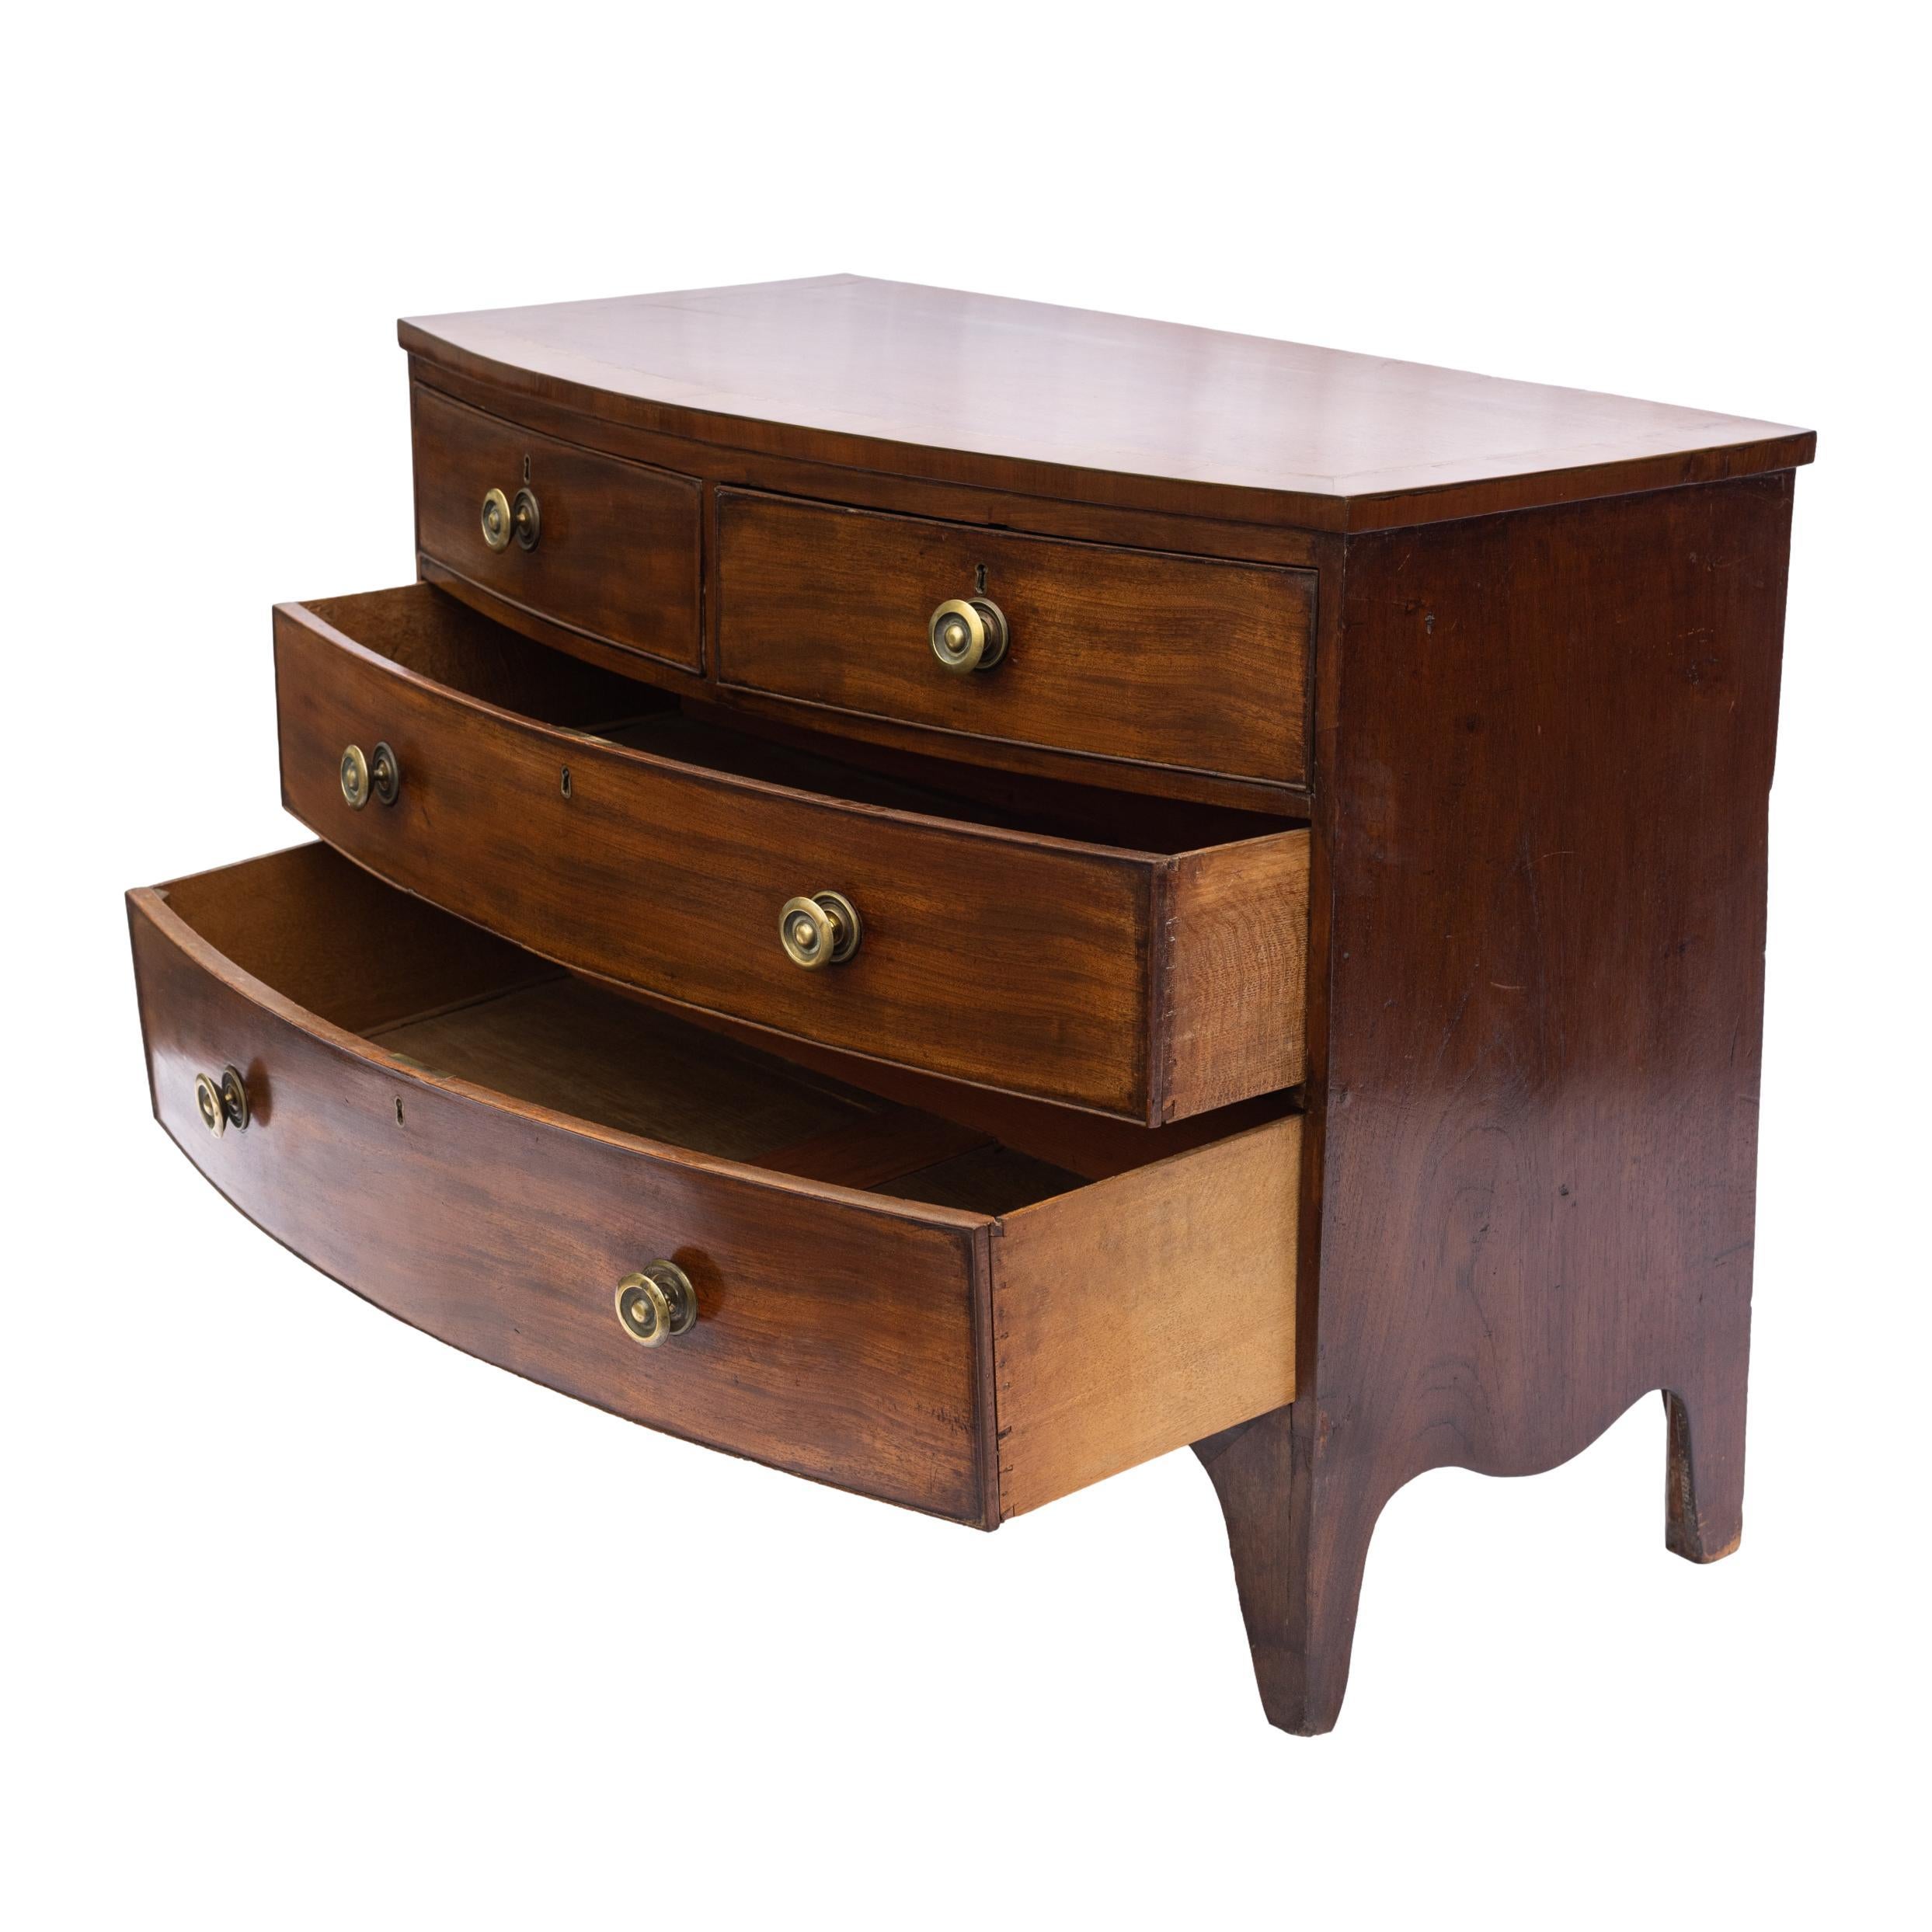 English Georgian Mahogany Bow-Front Chest of Drawers with Satinwood Inlay, ca. 1820